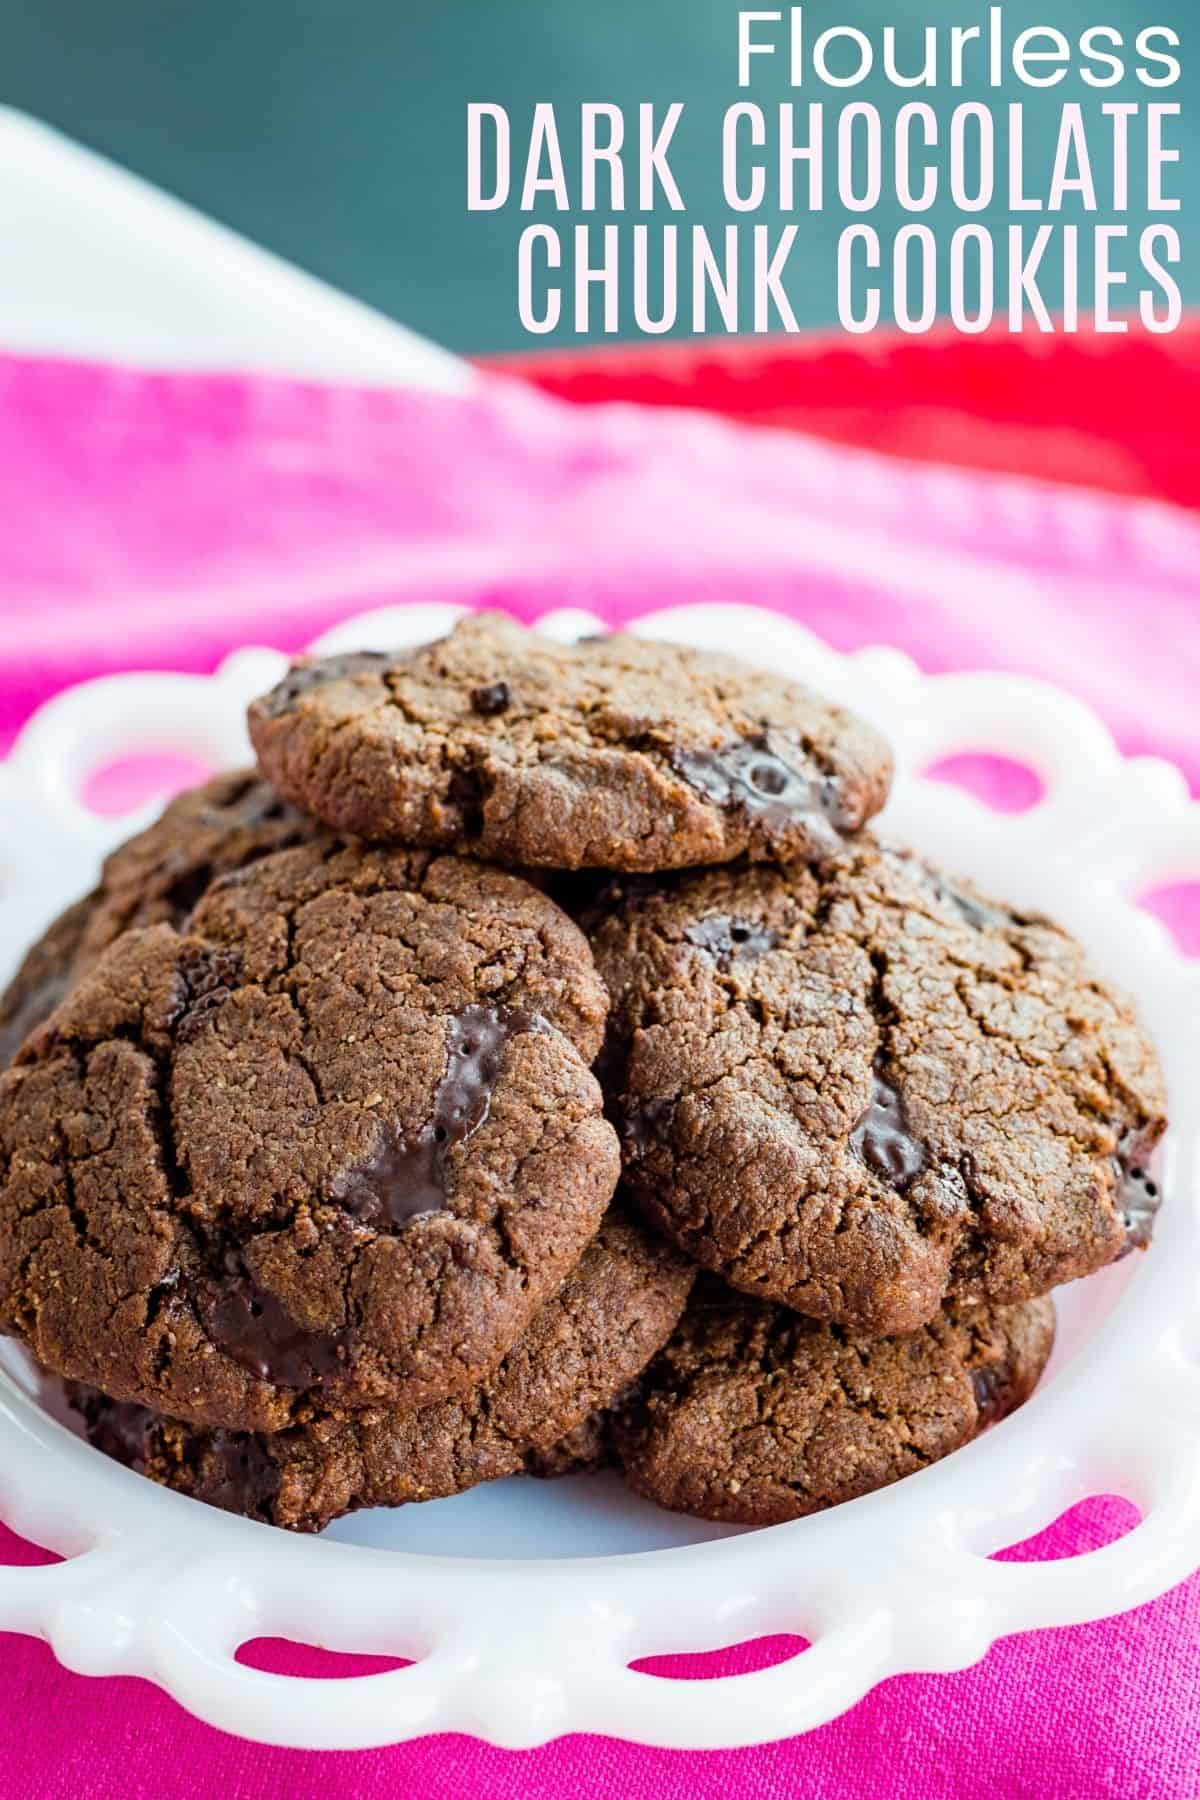 Flourless Coconut Almond Dark Chocolate Chunk Cookies - a simple, rich treat made with the best ingredients, like #GreenandBlacks #fairtrade #organic chocolate. Worthy of special occasion. Gluten free and paleo too | cupcakesandkalechips.com